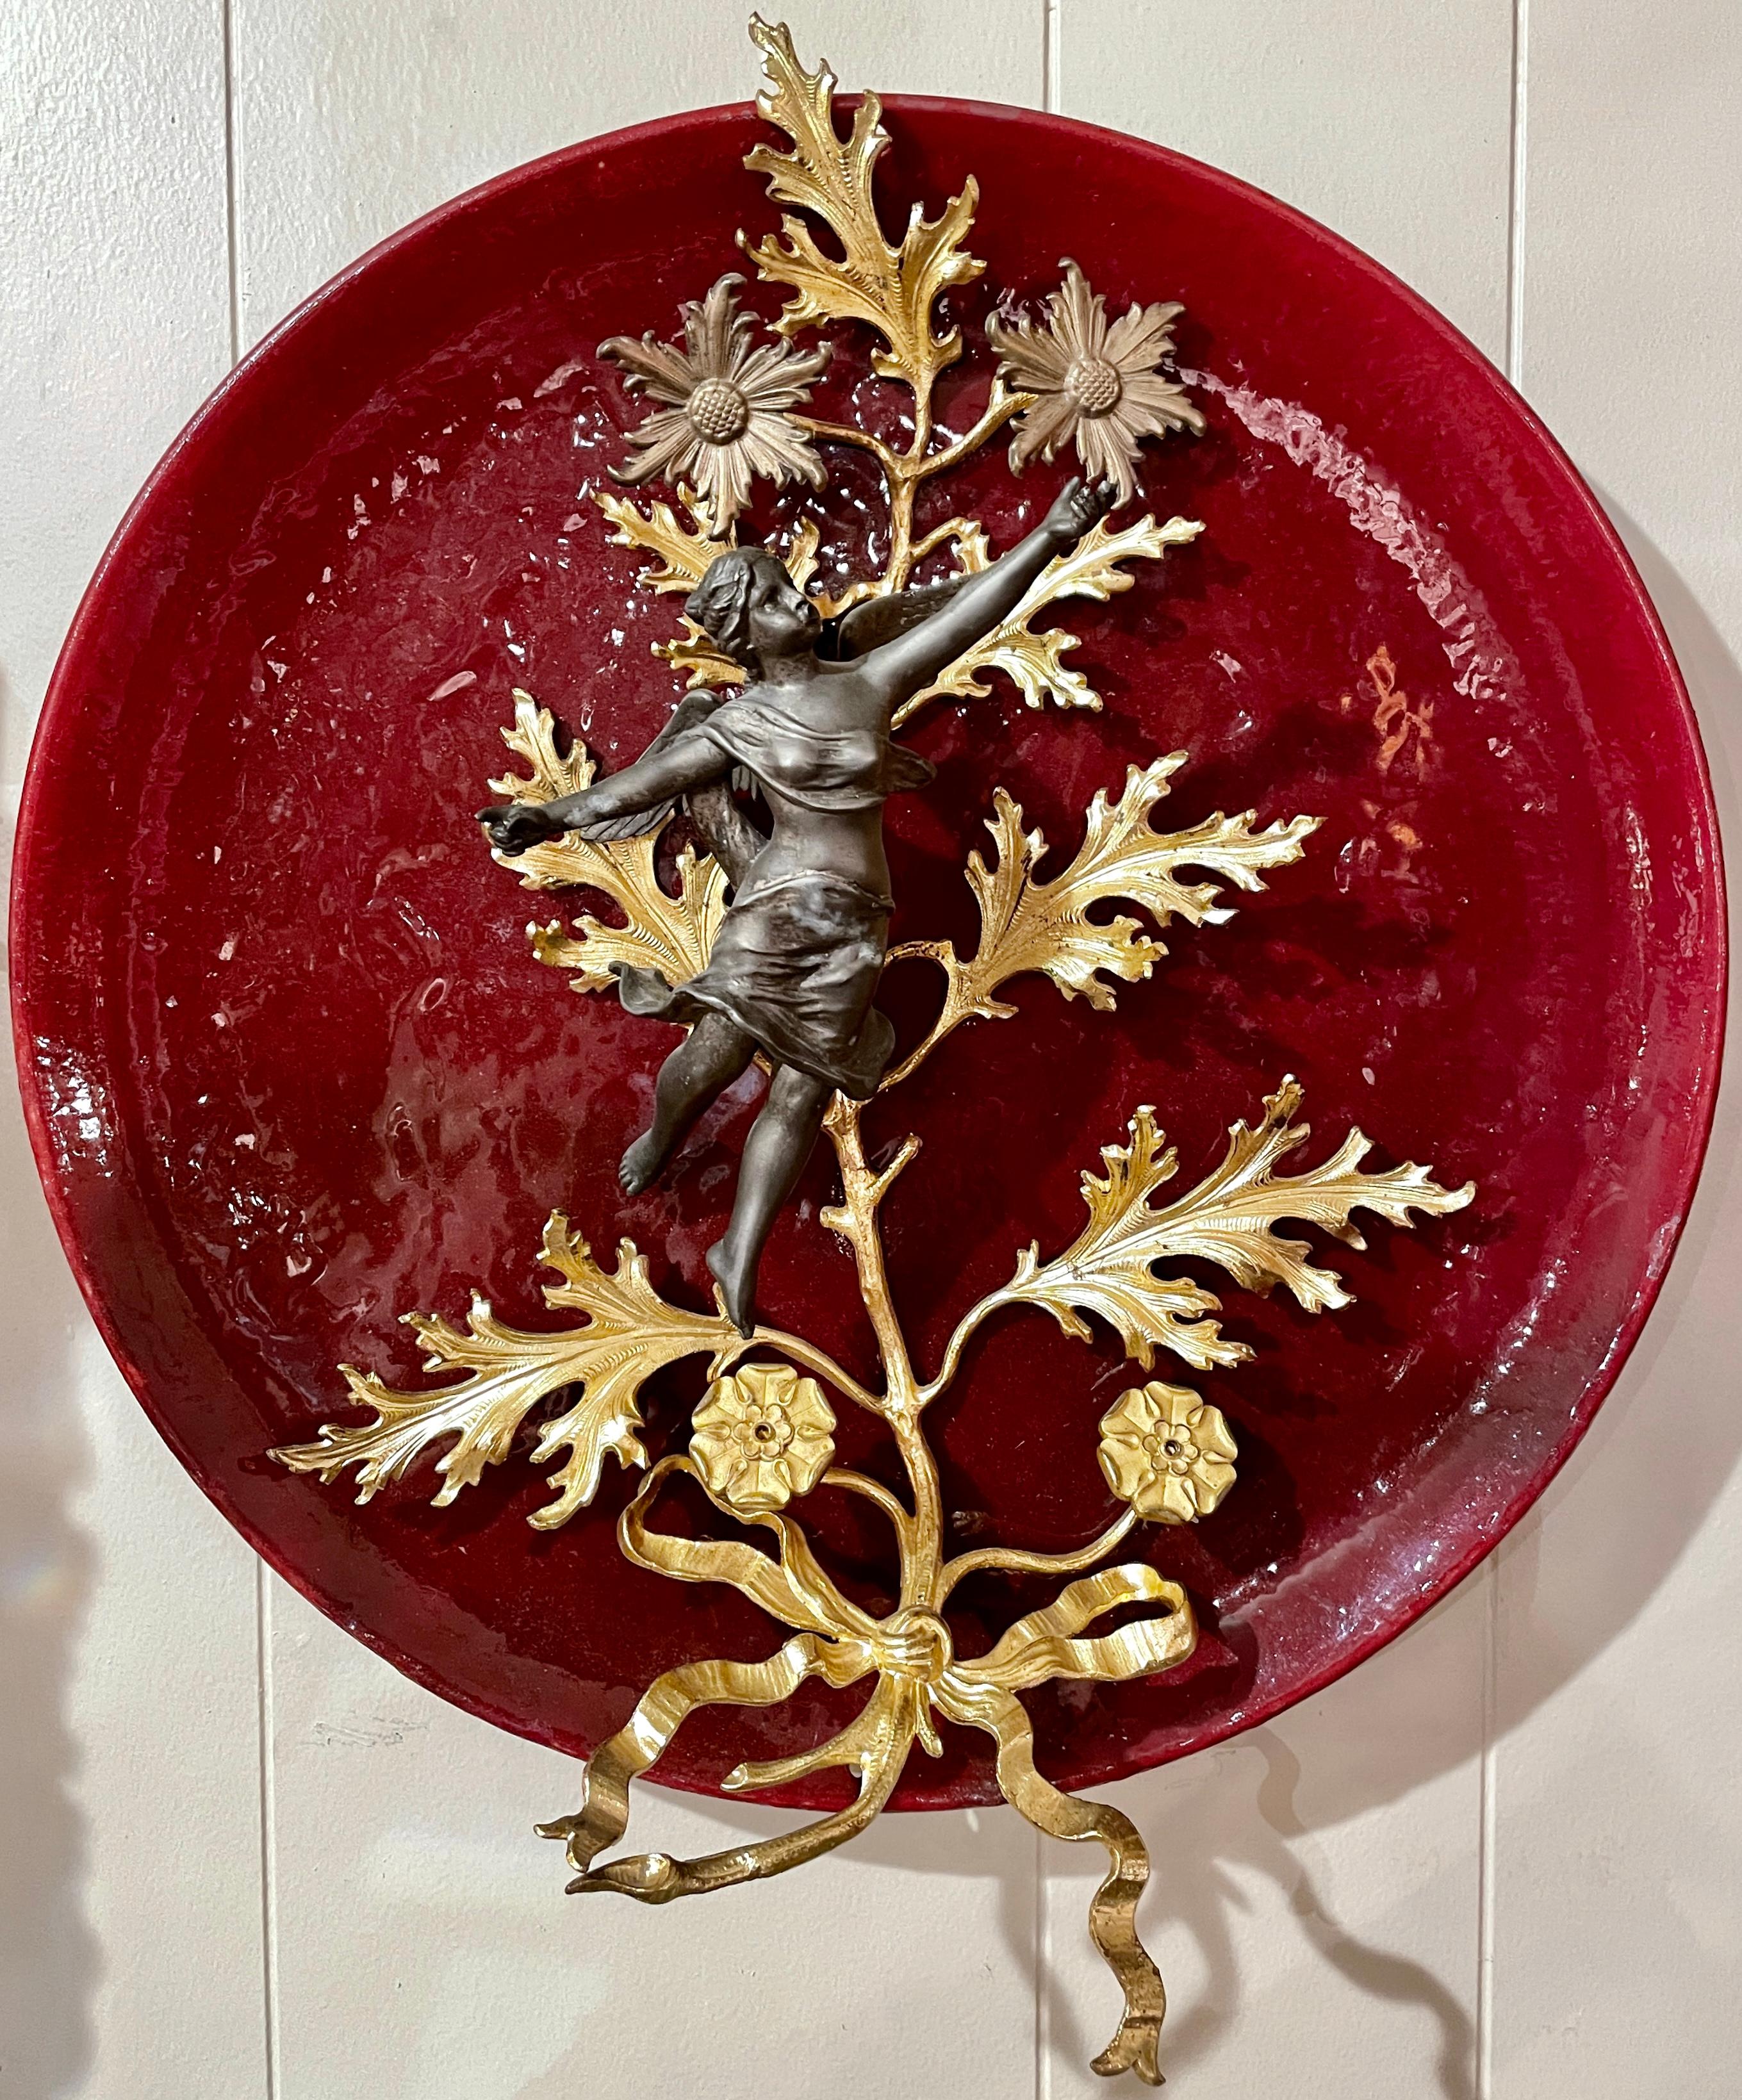 Pair antique French Faience red porcelain, patinated bronze & gold ormolu plates, circa 1890's. Figural seraphim angels with leaves and florals.